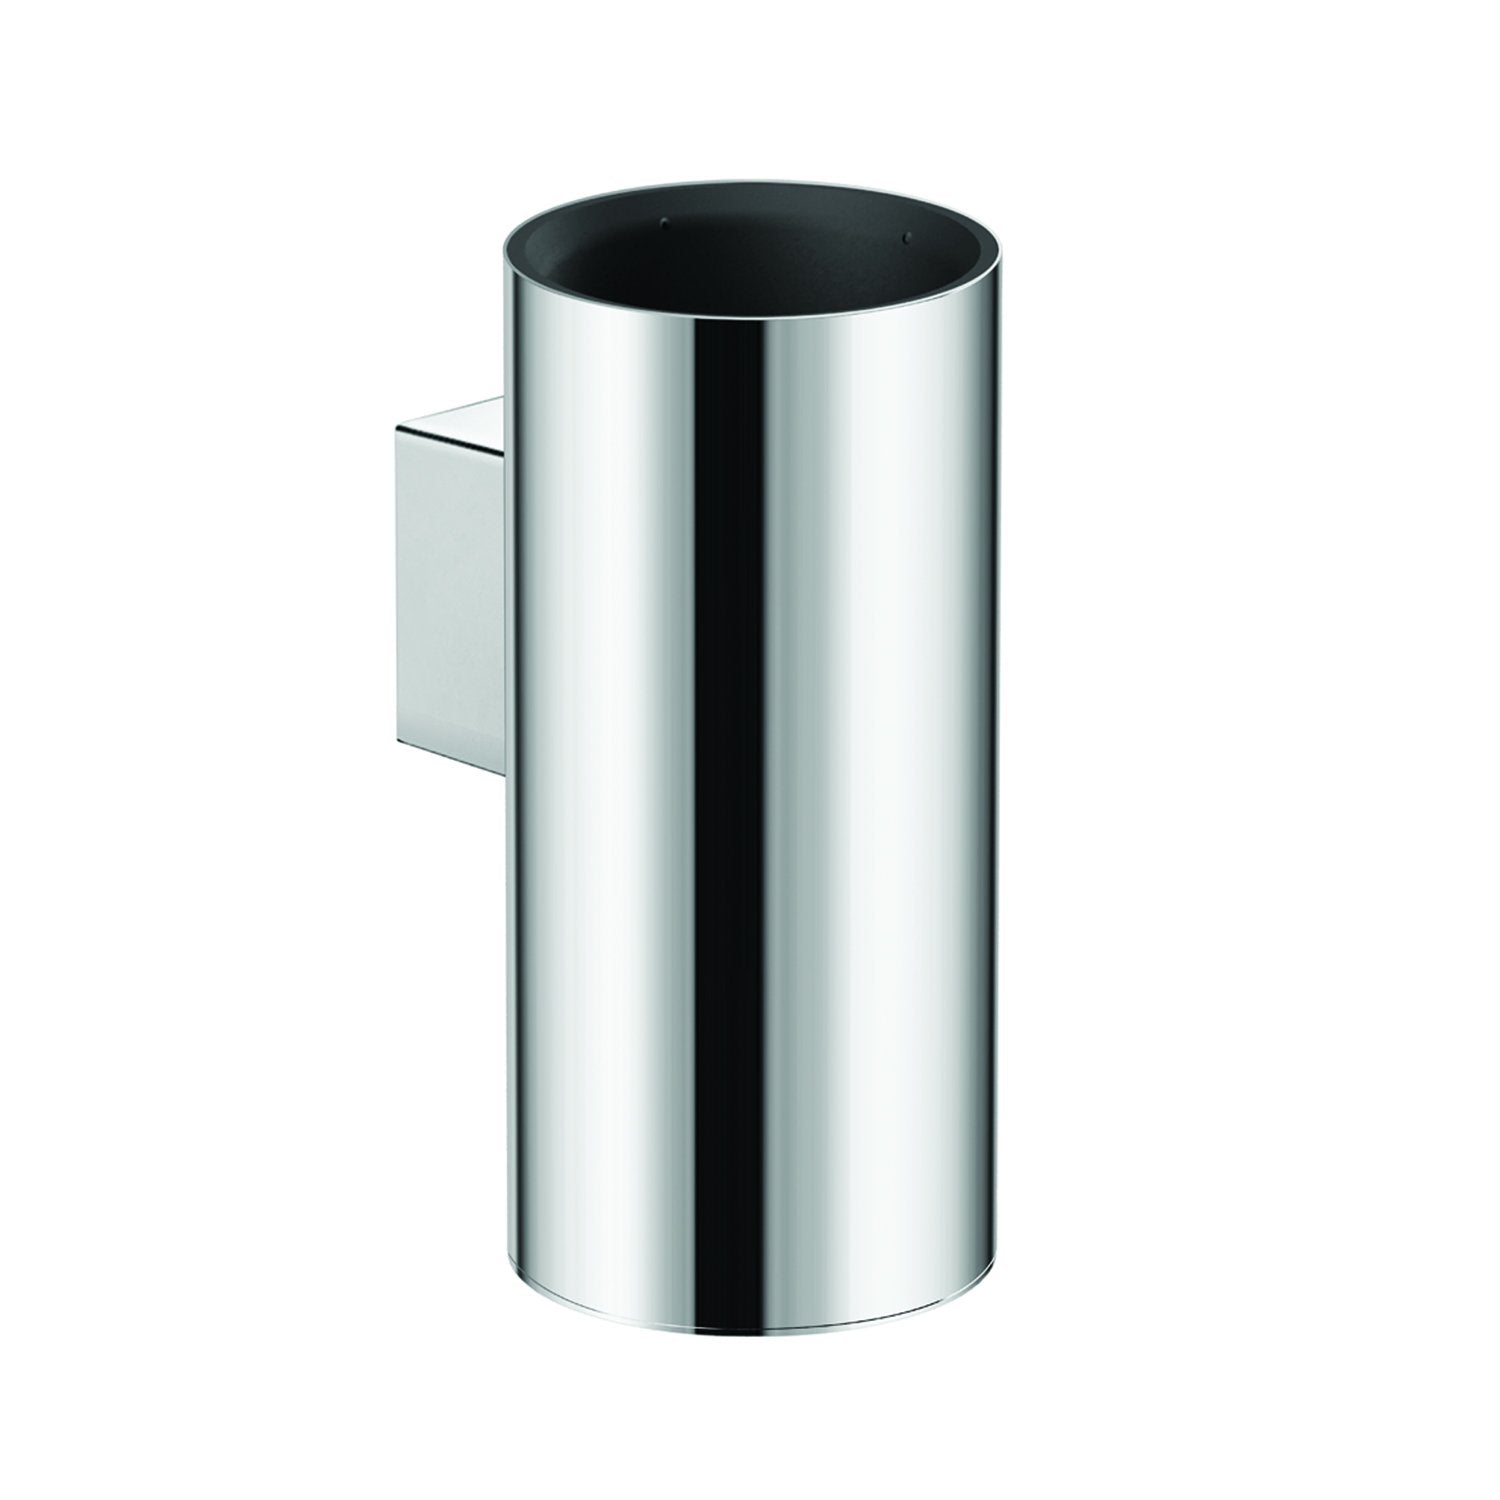 COSMIC Architect Bathroom Single Tumbler Toothbrush Holder, Wall Mount, Stainless Steel Cup, Chrome Finish, 2-7/16 x 5-1/4 x 3-7/16 Inches (2050153)